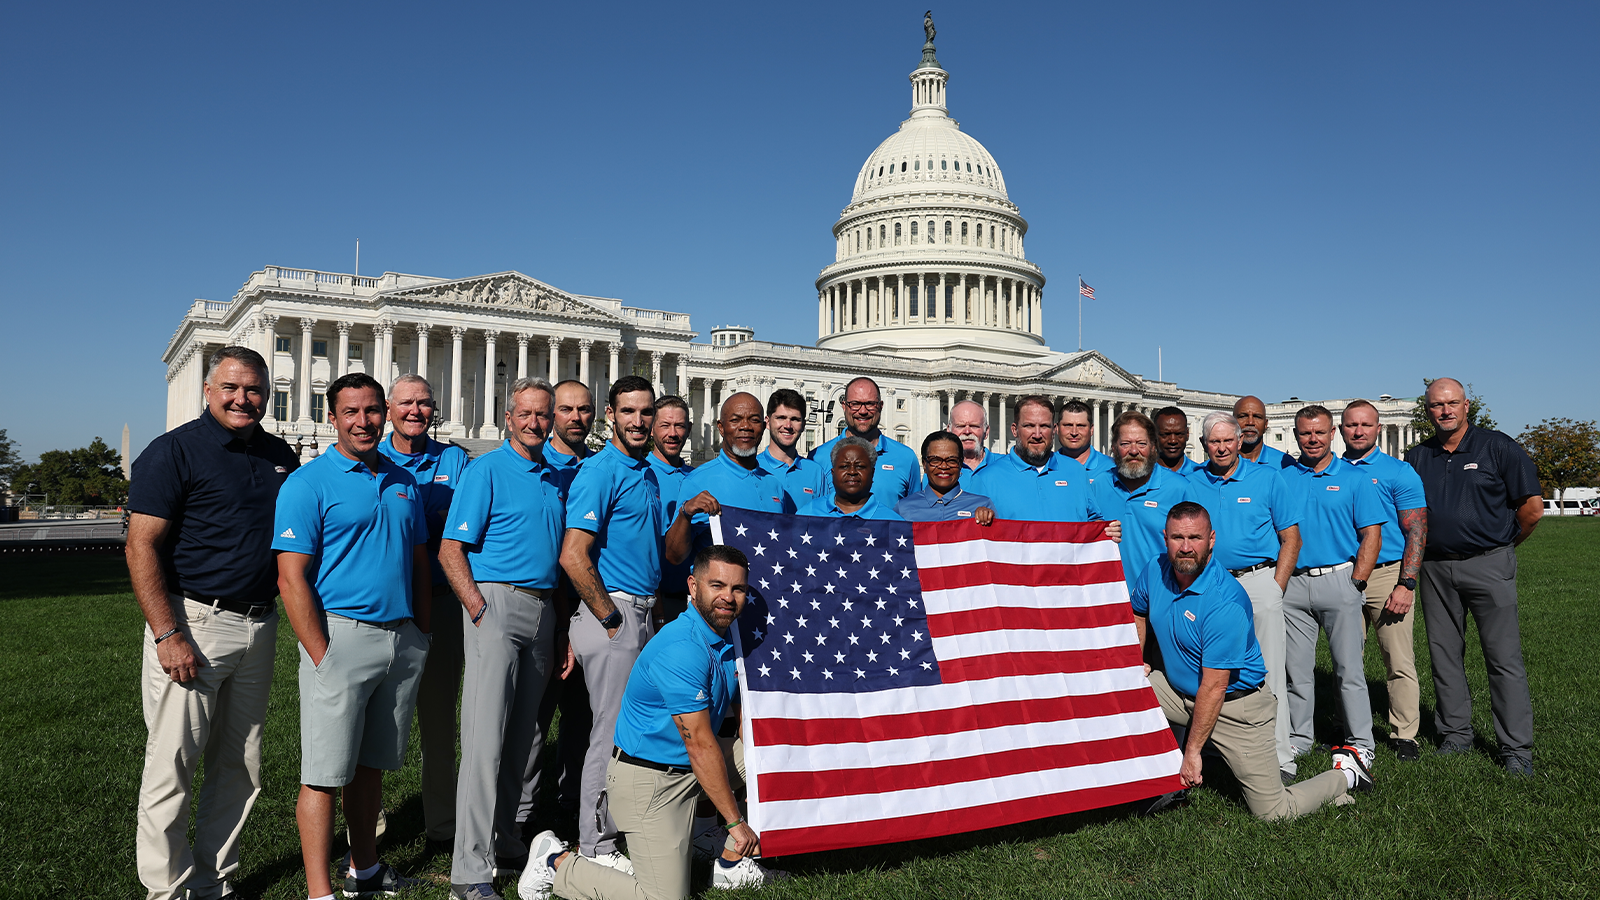 PGA of America Vice President Don Rea Jr., PGA HOPE participants and PGA Professional, Brian Jones pose for a photo at the Capitol Building on October 15, 2022 in Washington, DC. (Photo by Scott Taetsch/PGA of America)